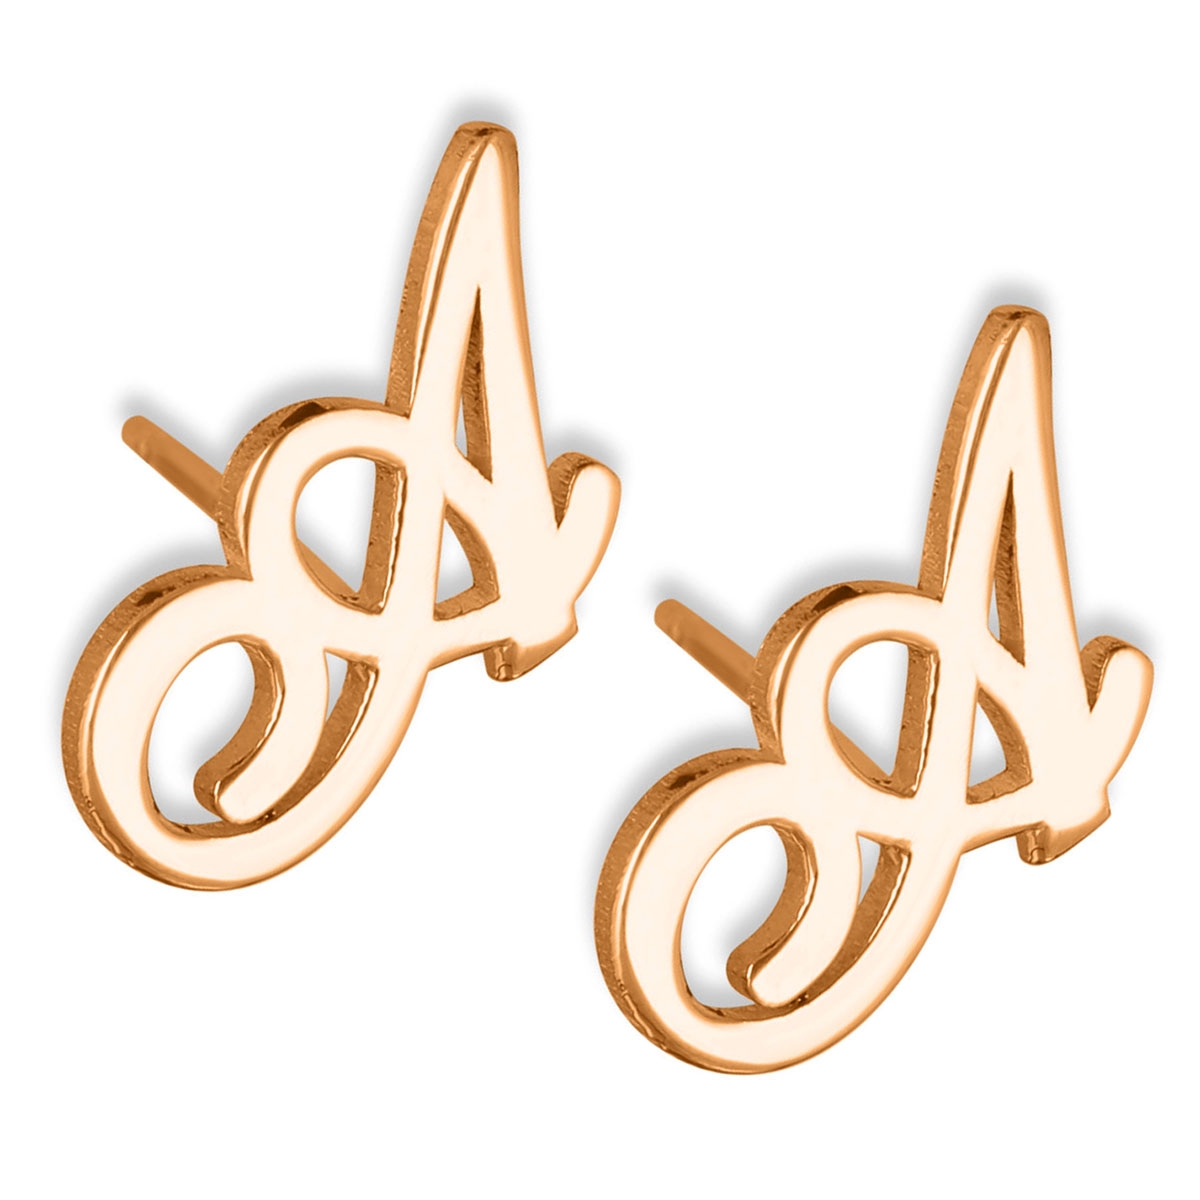 24k Rose Gold Plated Silver Allegro Font Personalized Initials Stud Earrings - 1